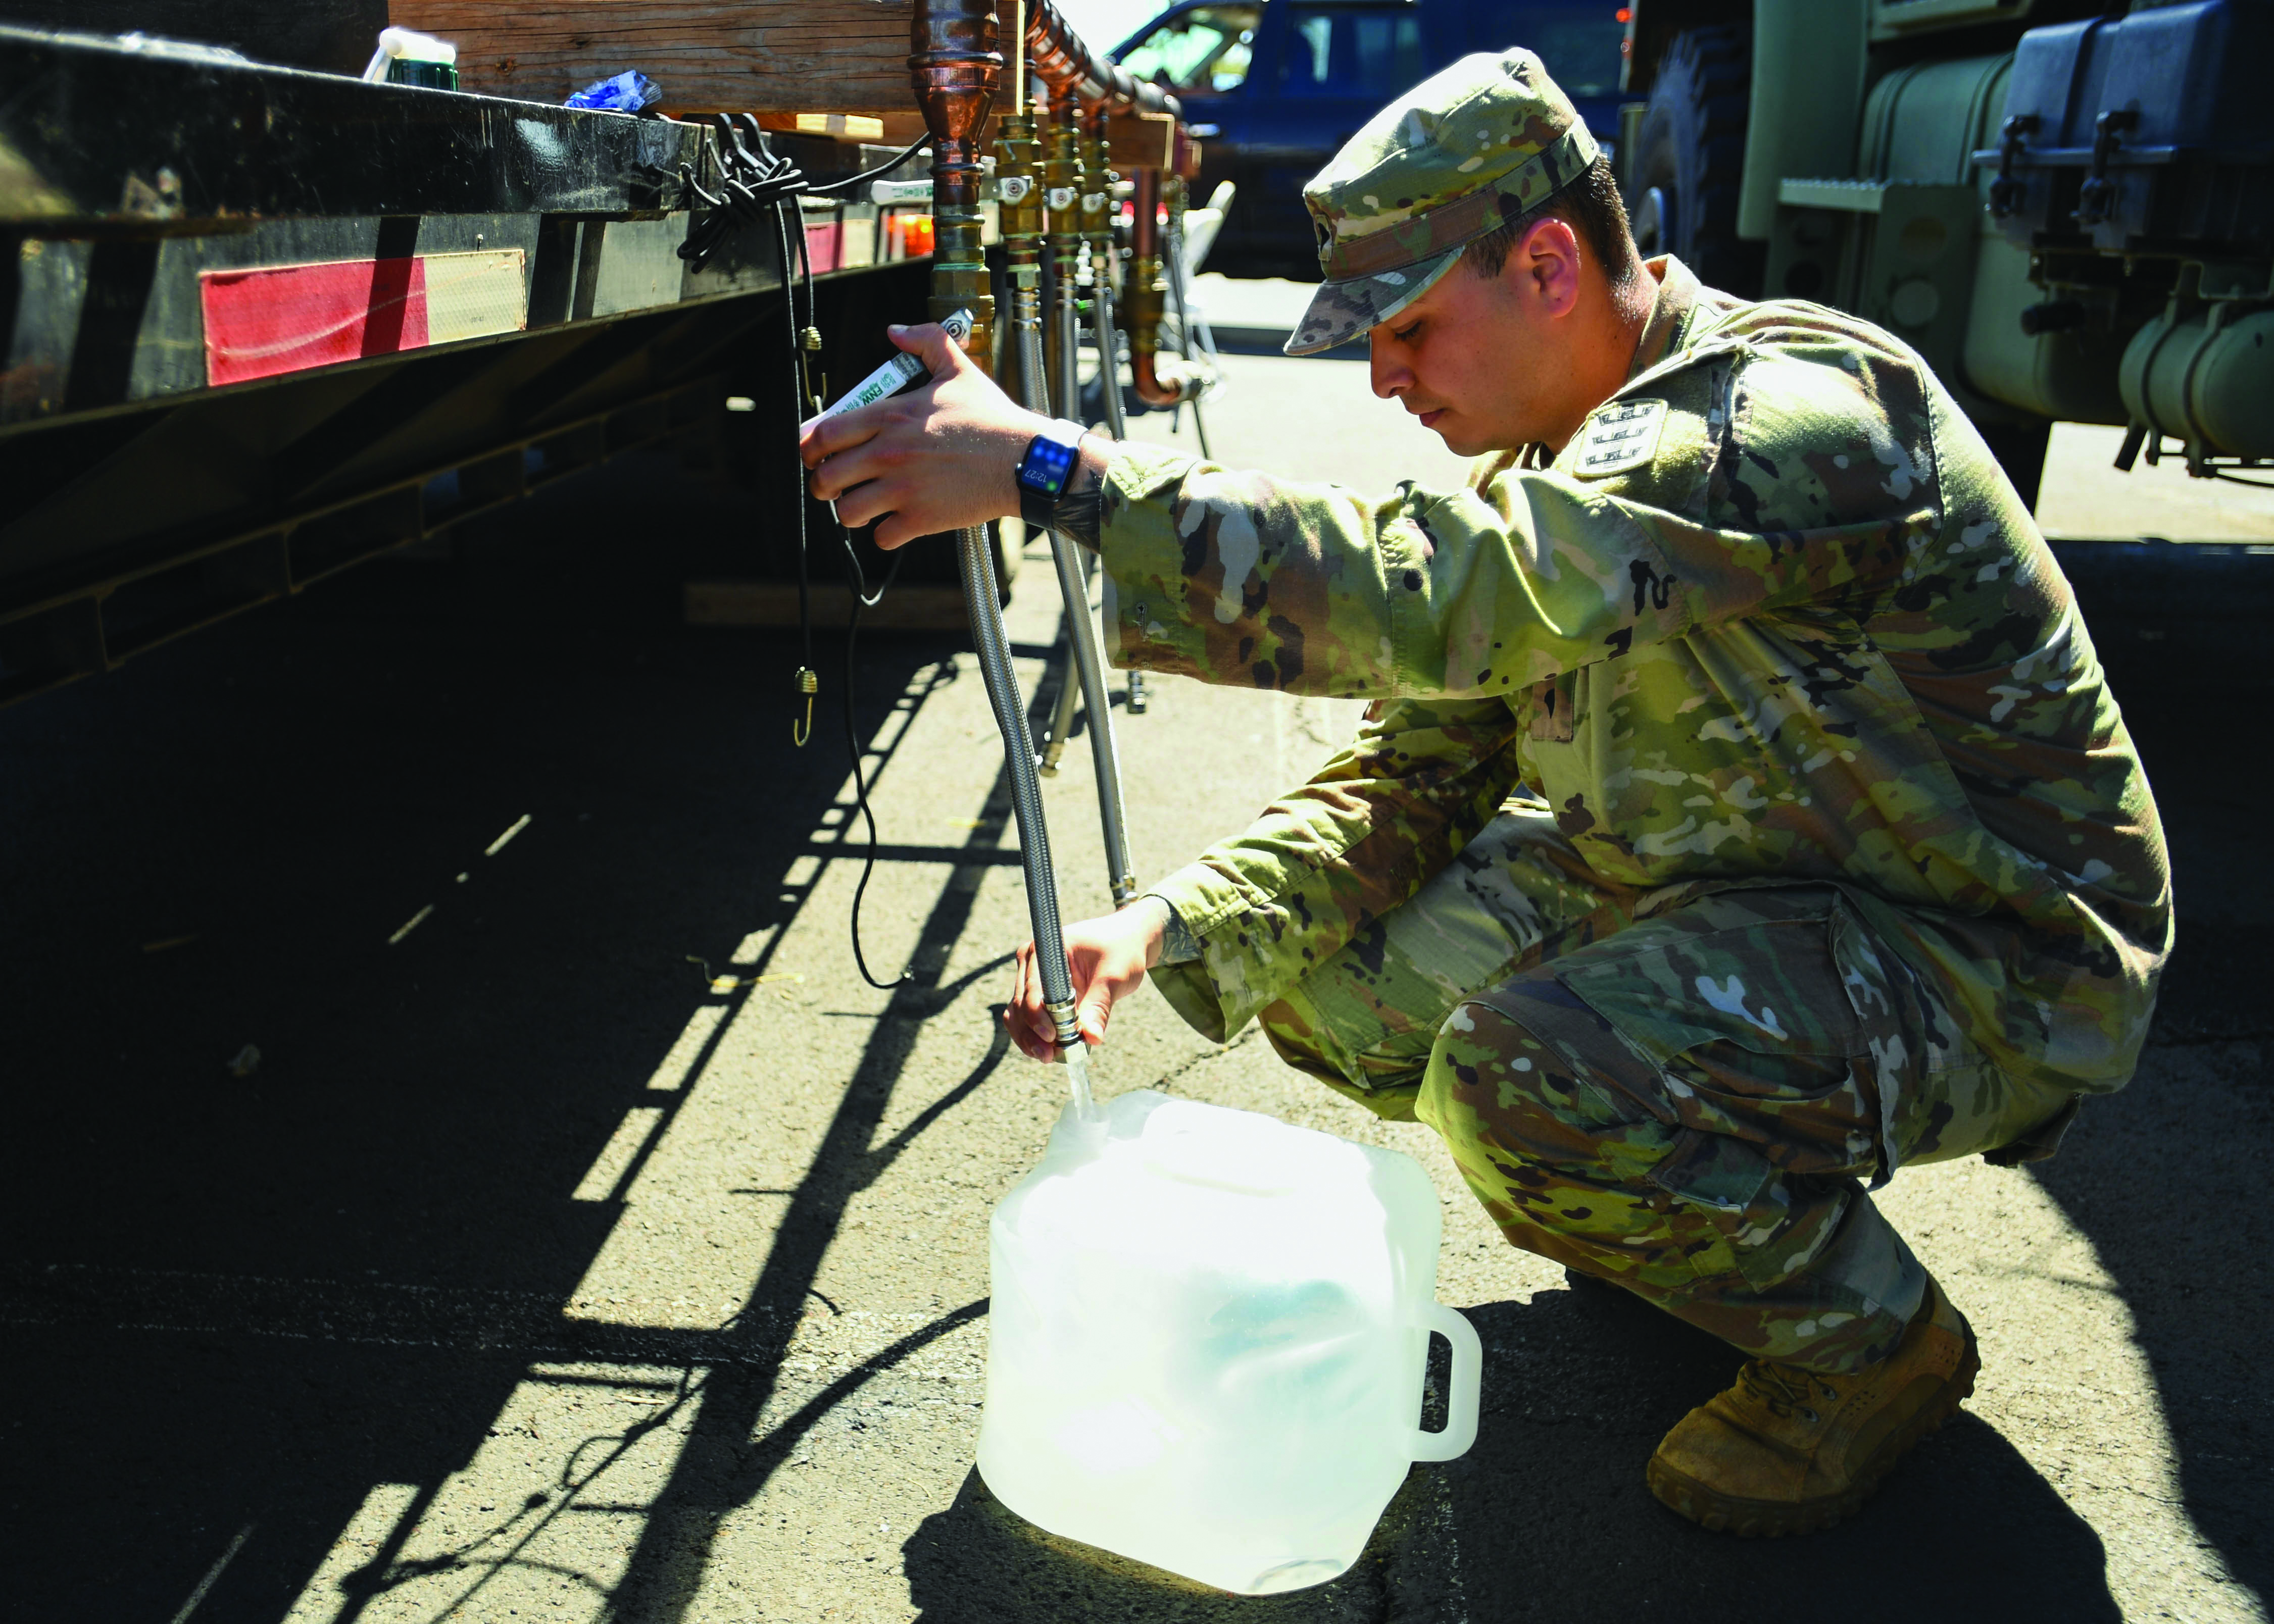 A Soldier stationed in Hawaii fills a bulk water container at the Navy Exchange Moanalua Terrace water distribution station. The U.S. Navy is working closely with
        the Hawaii Department of Health, U.S. Environmental Protection Agency, and the U.S. Army to restore safe drinking water to Joint Base Pearl Harbor-Hickam
        housing communities through sampling and flushing, and the recovery of the Red Hill Well. (Credit: Mass Communication Specialist 2d Class Chelsea D. Meiller)